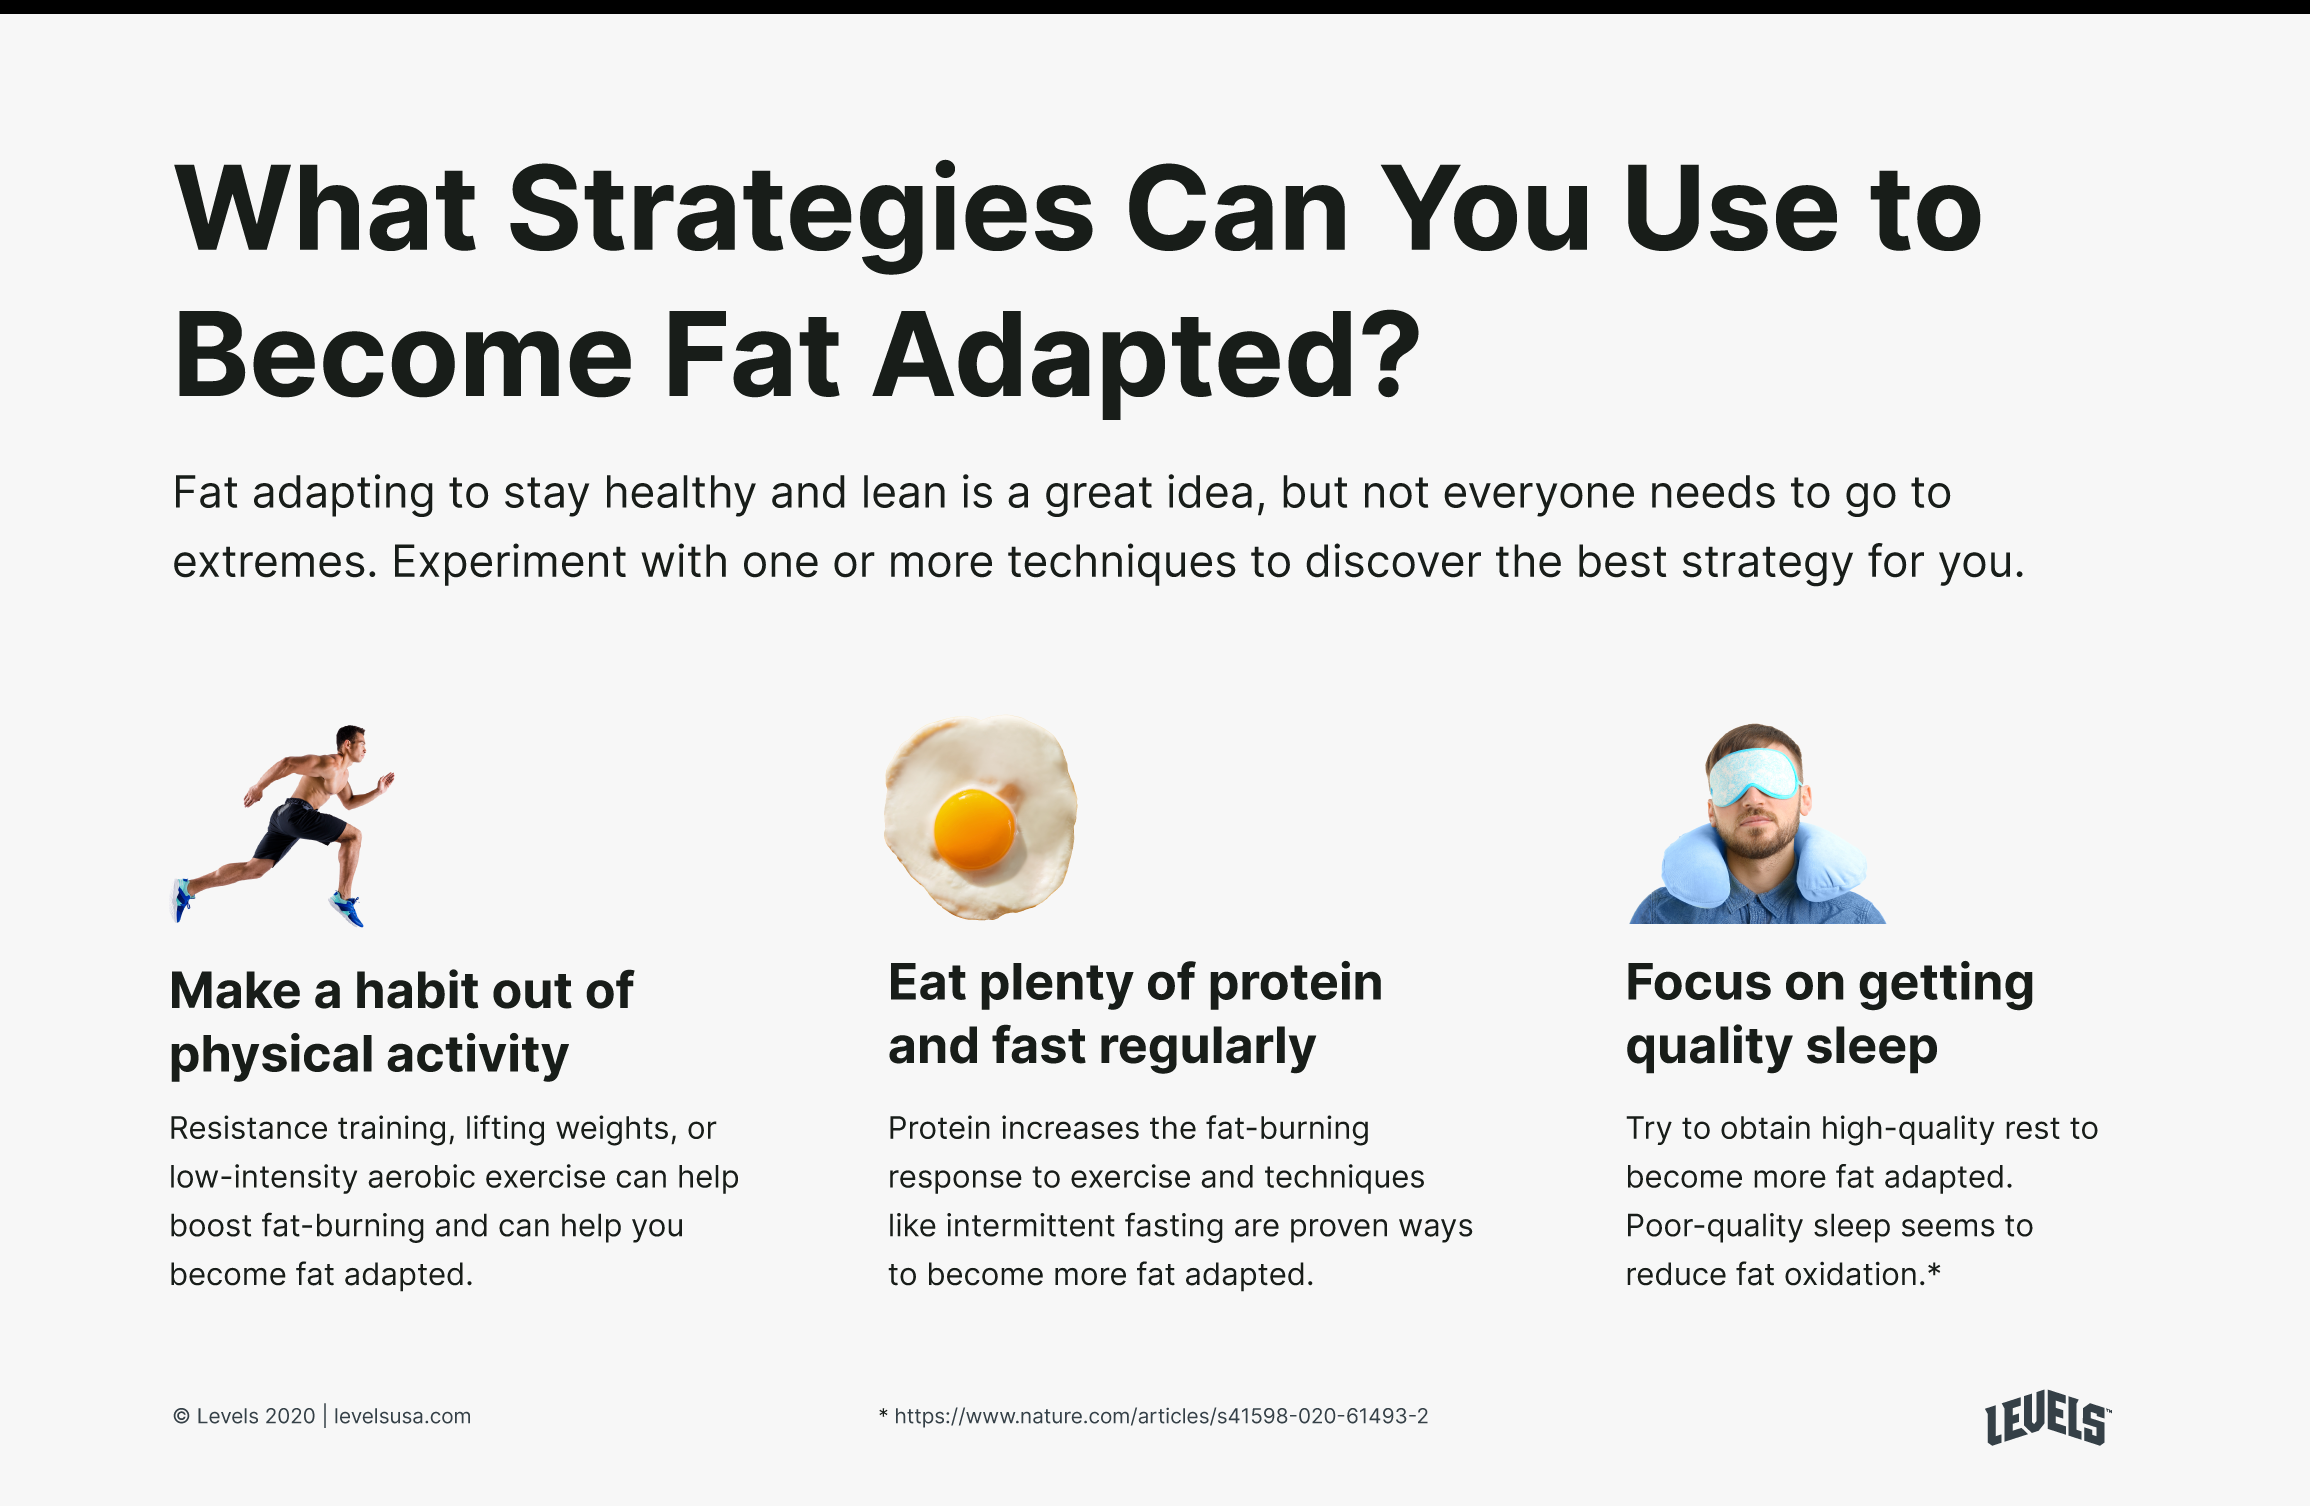 What Strategies Can You Use to Become Fat Adapted - Infographic